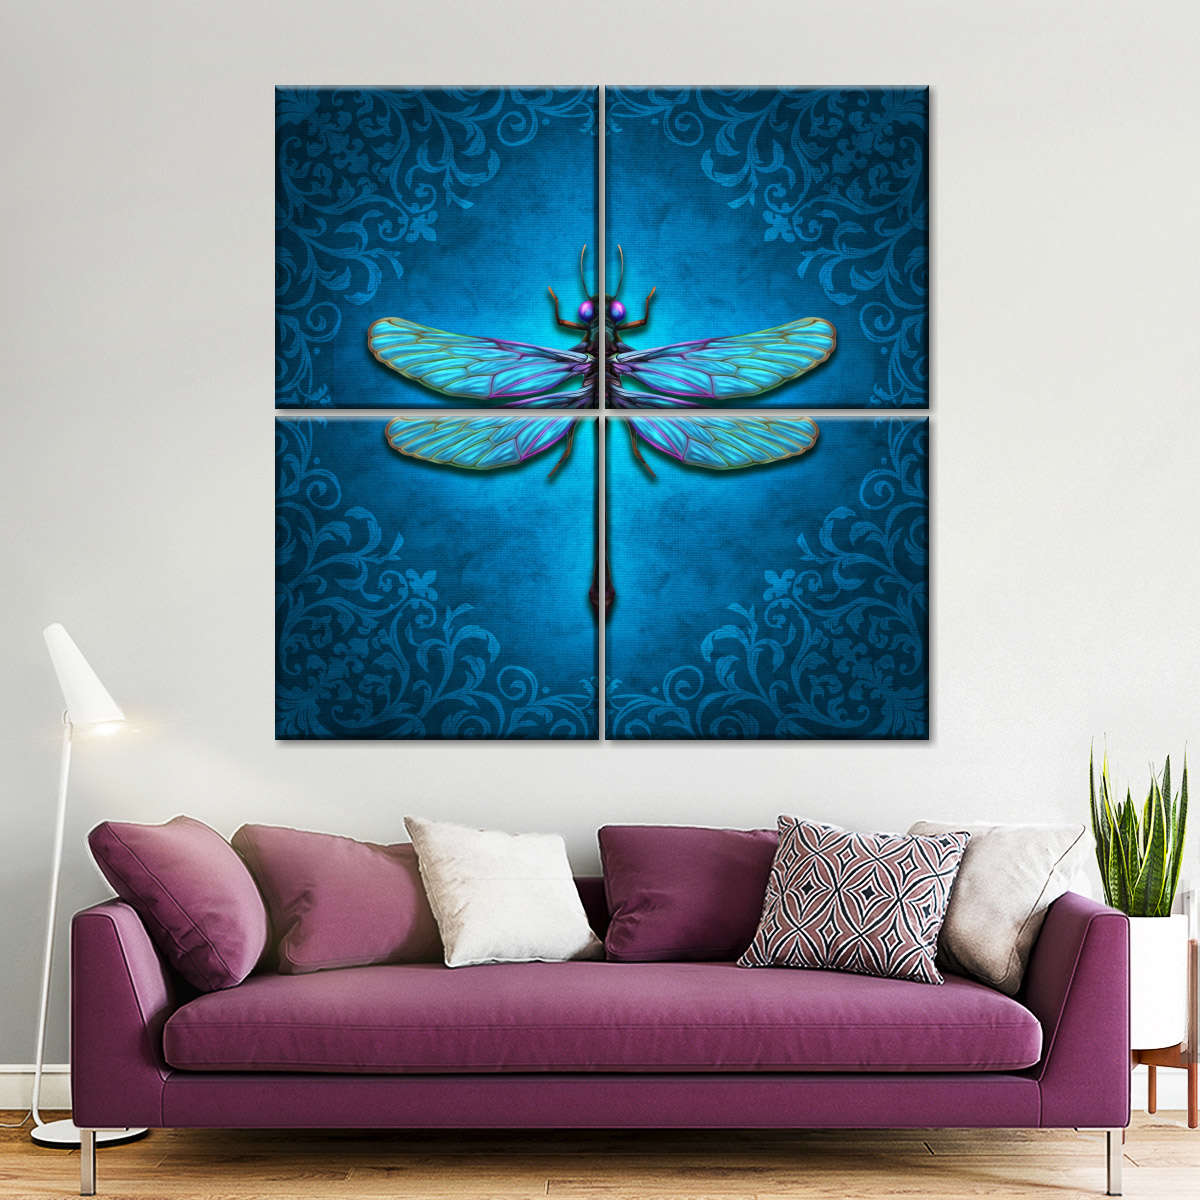  Ambesonne Dragonfly Wall Art with Frame, Wild Grass and  Dragonflies in Exquisitely Growing Lawn Herb Bush Rural Pattern, Printed  Fabric Poster for Bathroom Living Room Dorms, 35 x 23, Pale Green